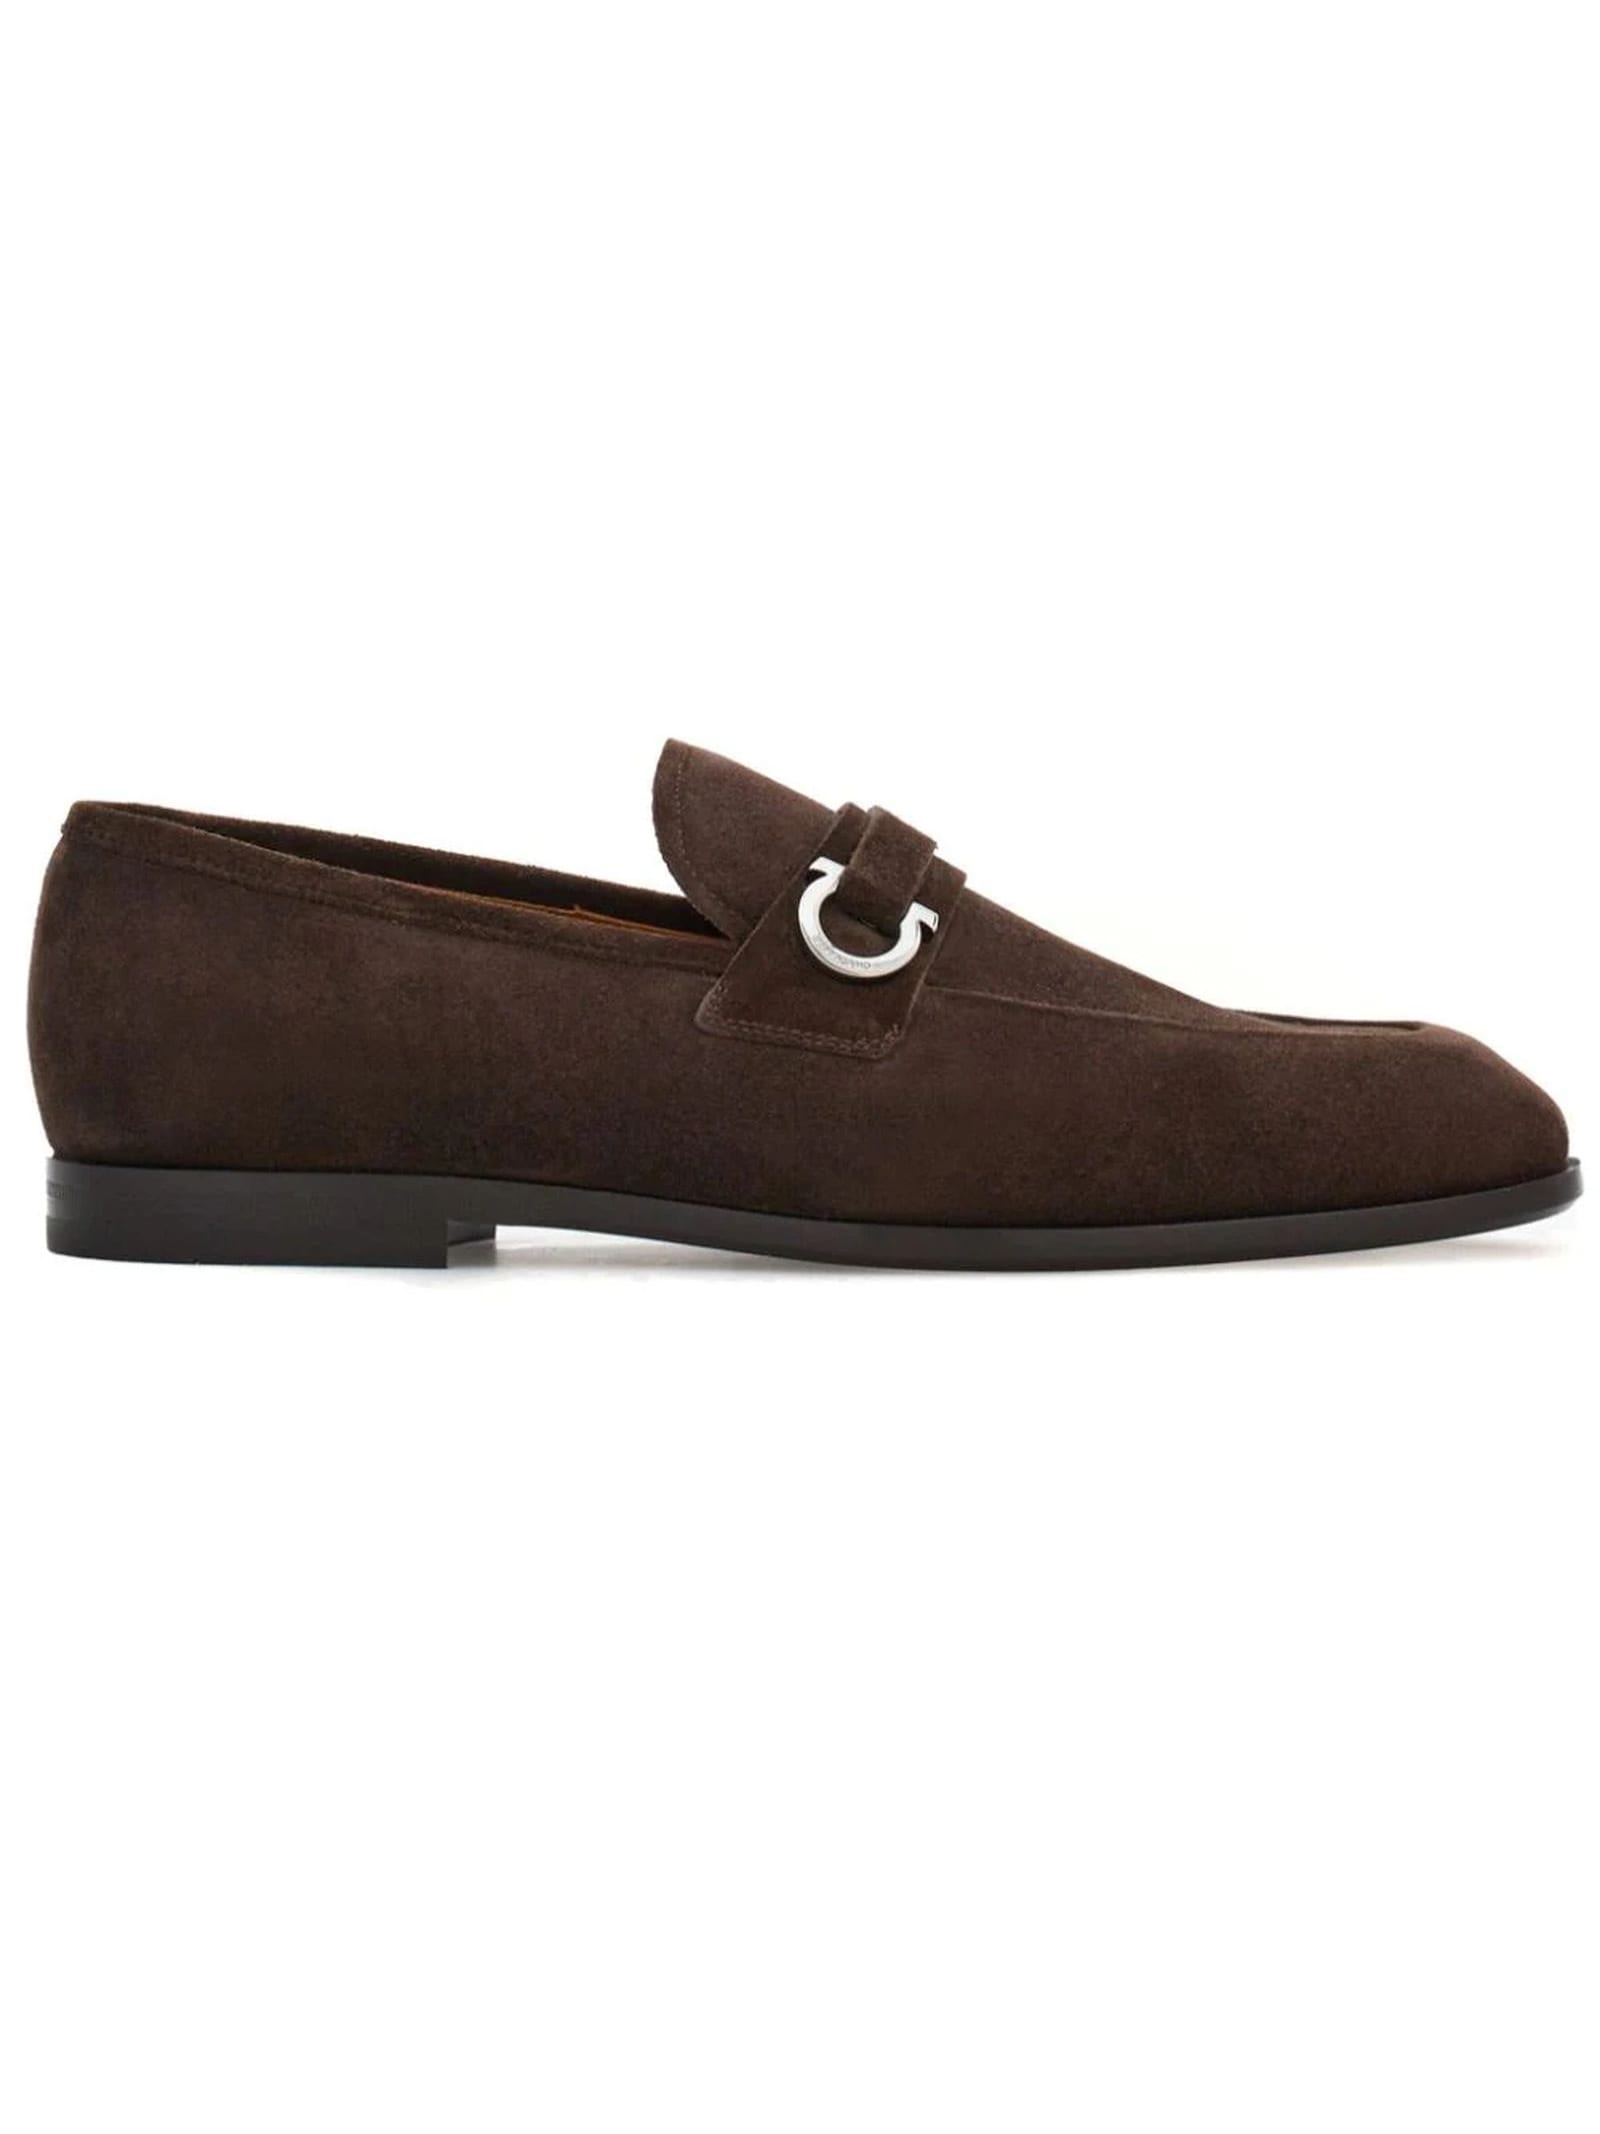 Brown Suede Leather Loafer